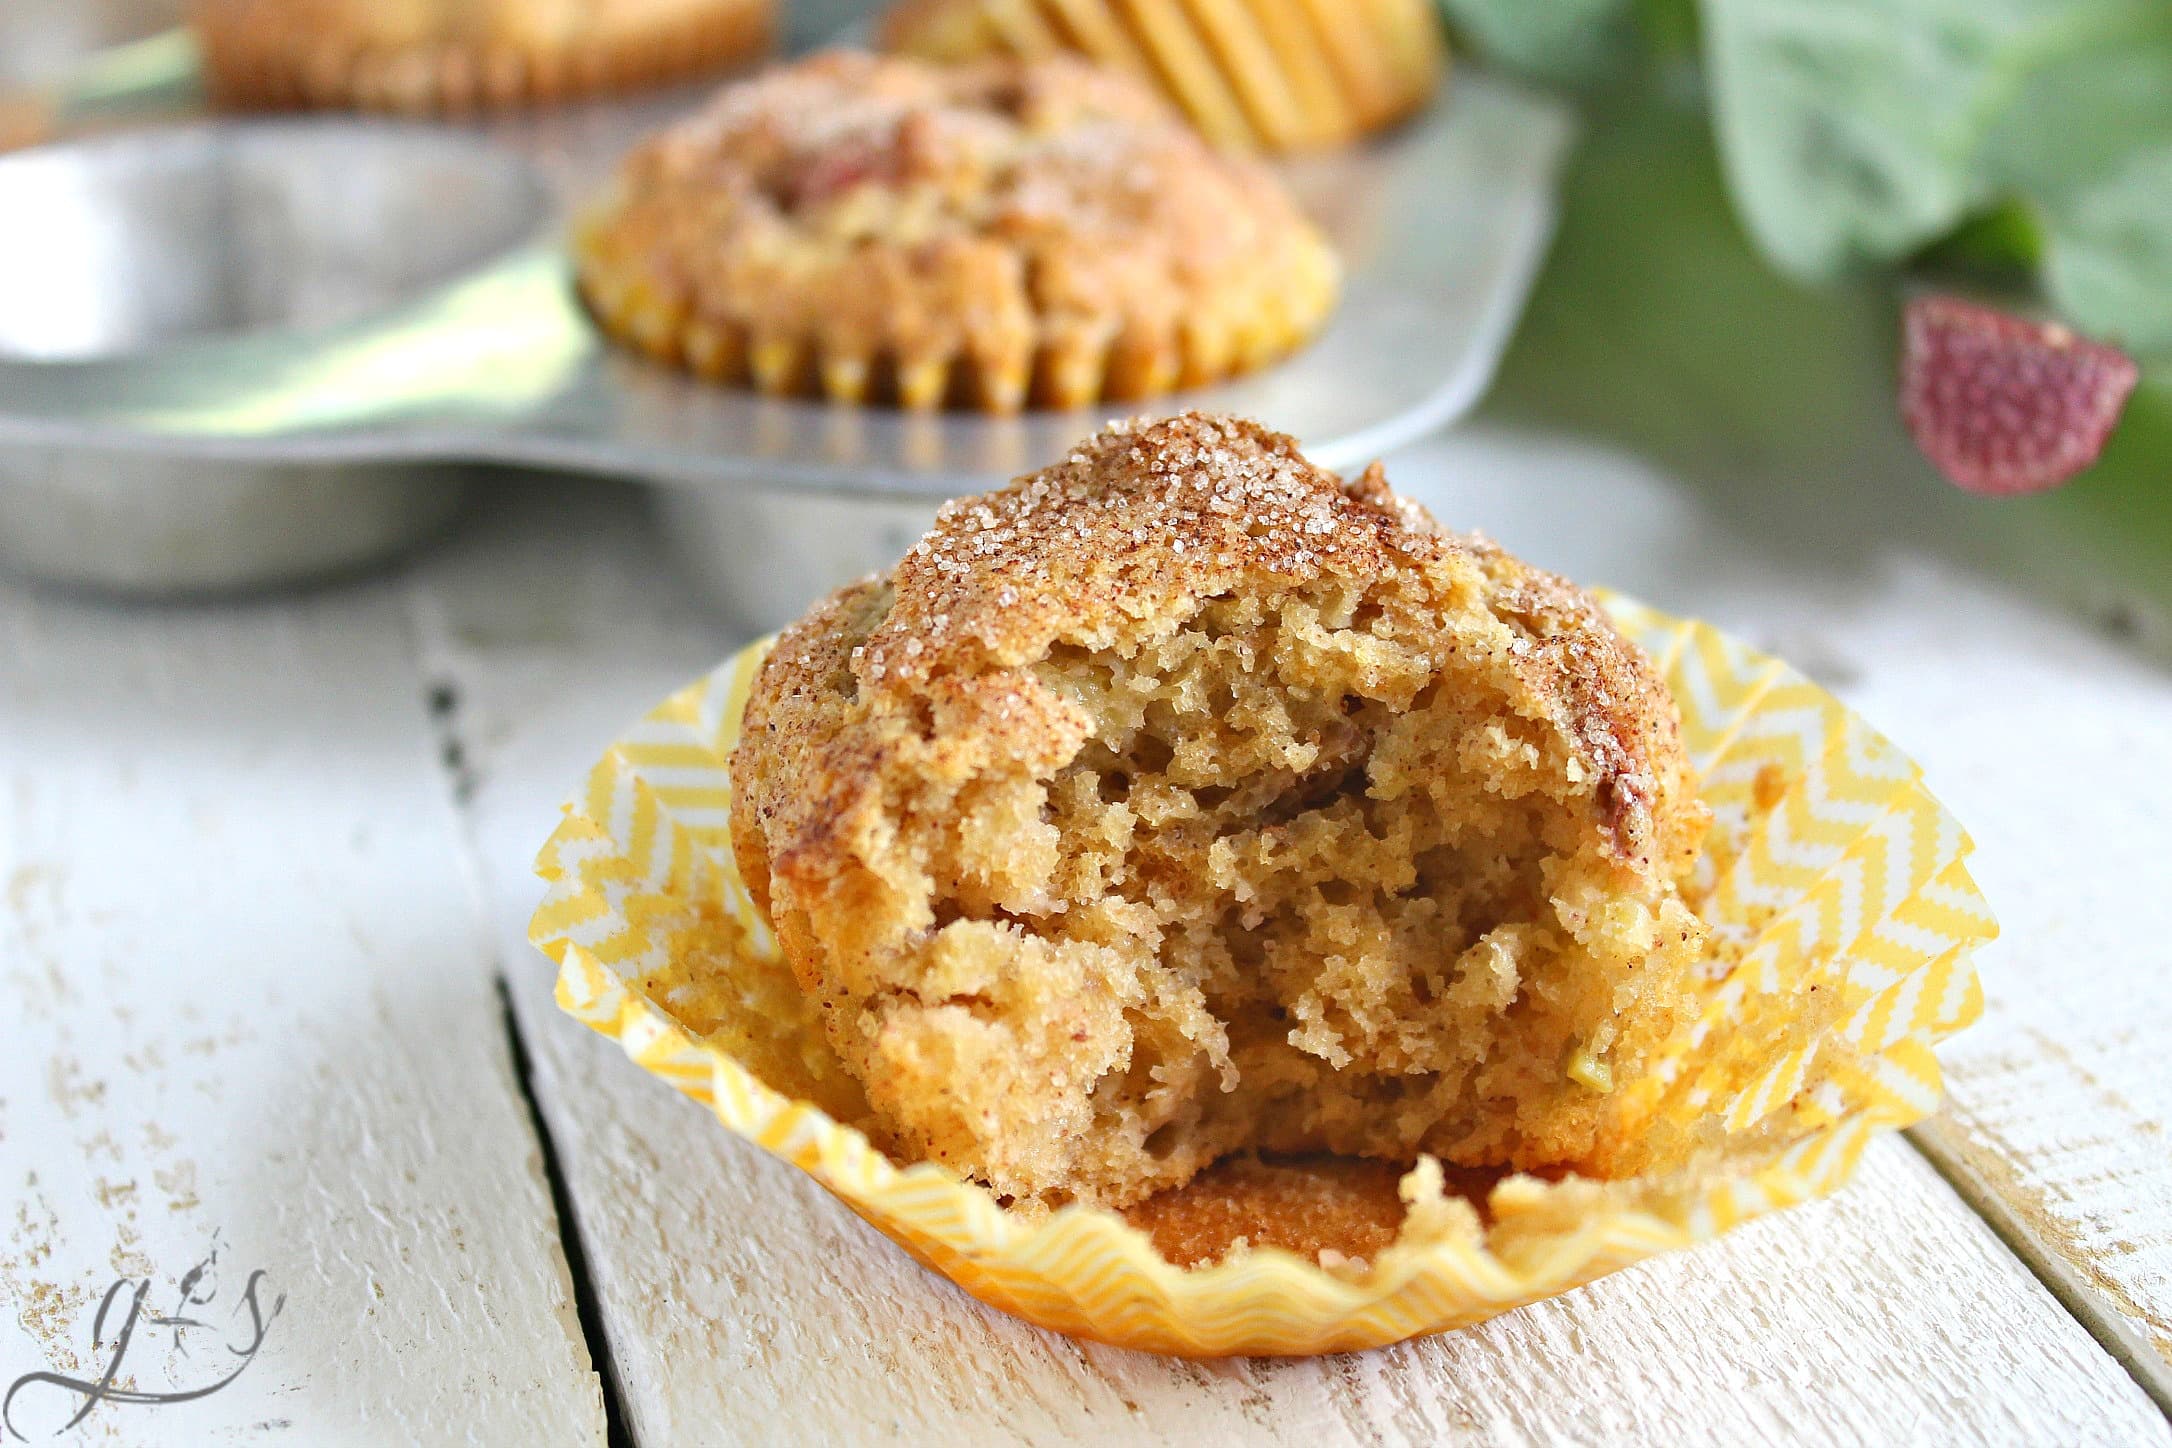 The BEST Gluten-Free Sour Cream Rhubarb Muffins | This easy and healthy breakfast or brunch recipe uses gluten-free flour, but don't let that scare you off. They can be made with whole wheat pastry flour and still retain their light and soft texture. The batter contains coconut oil and applesauce along with other real food ingredients and is topped with the perfect mixture of cinnamon-sugar. These also freeze well! 